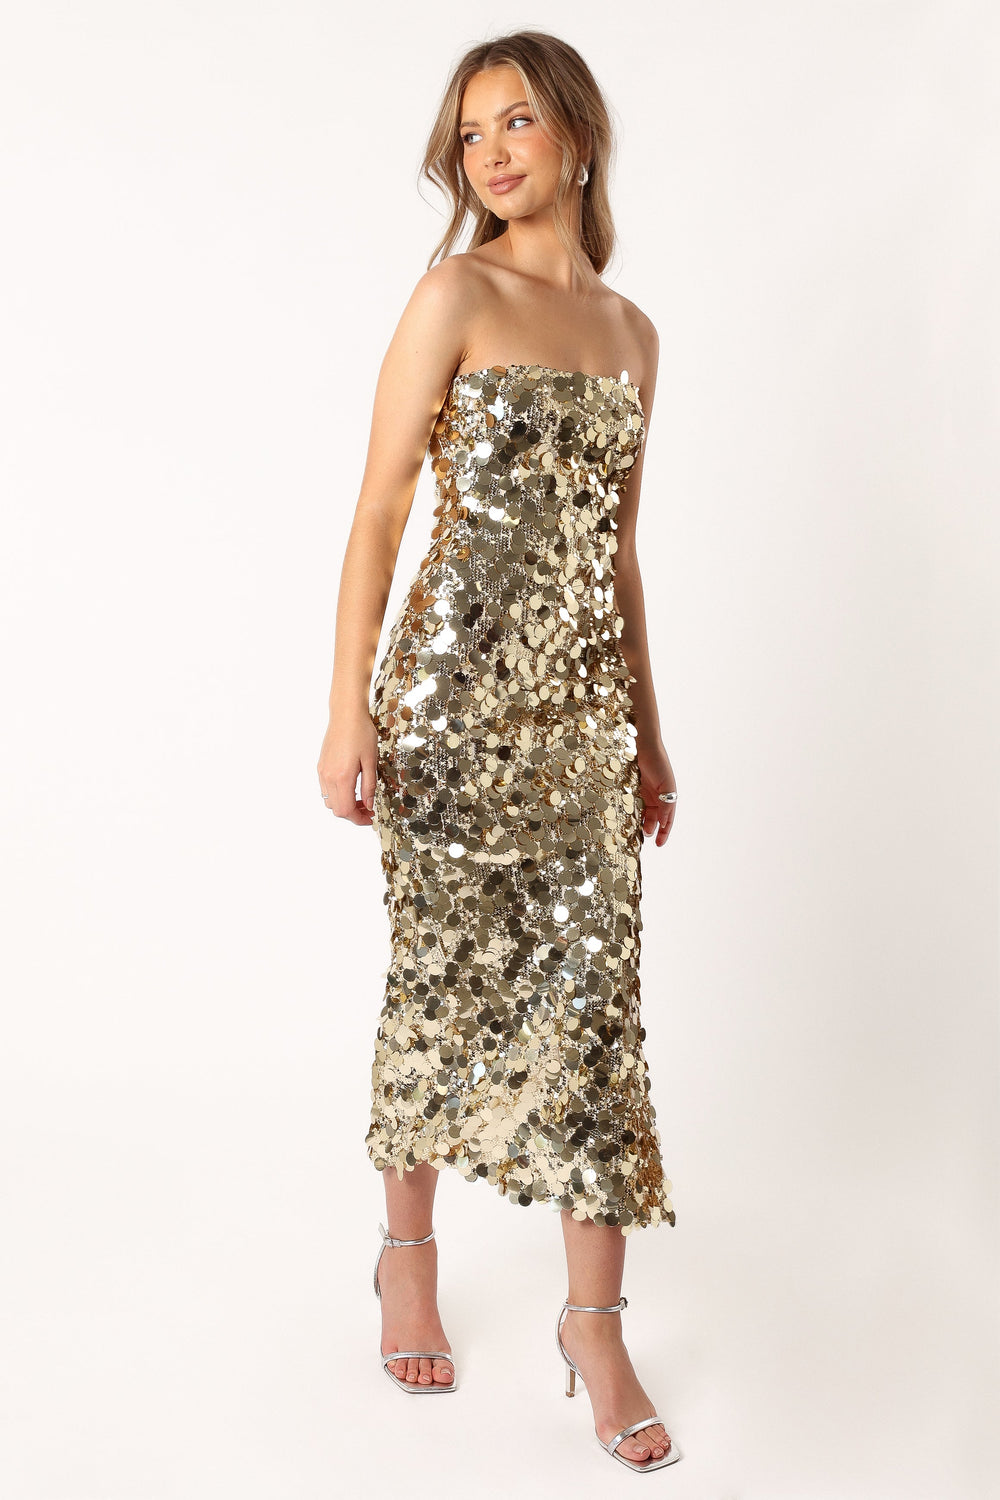 Petal and Pup USA DRESSES Gabourne Strapless Midi Dress - Gold Sequin